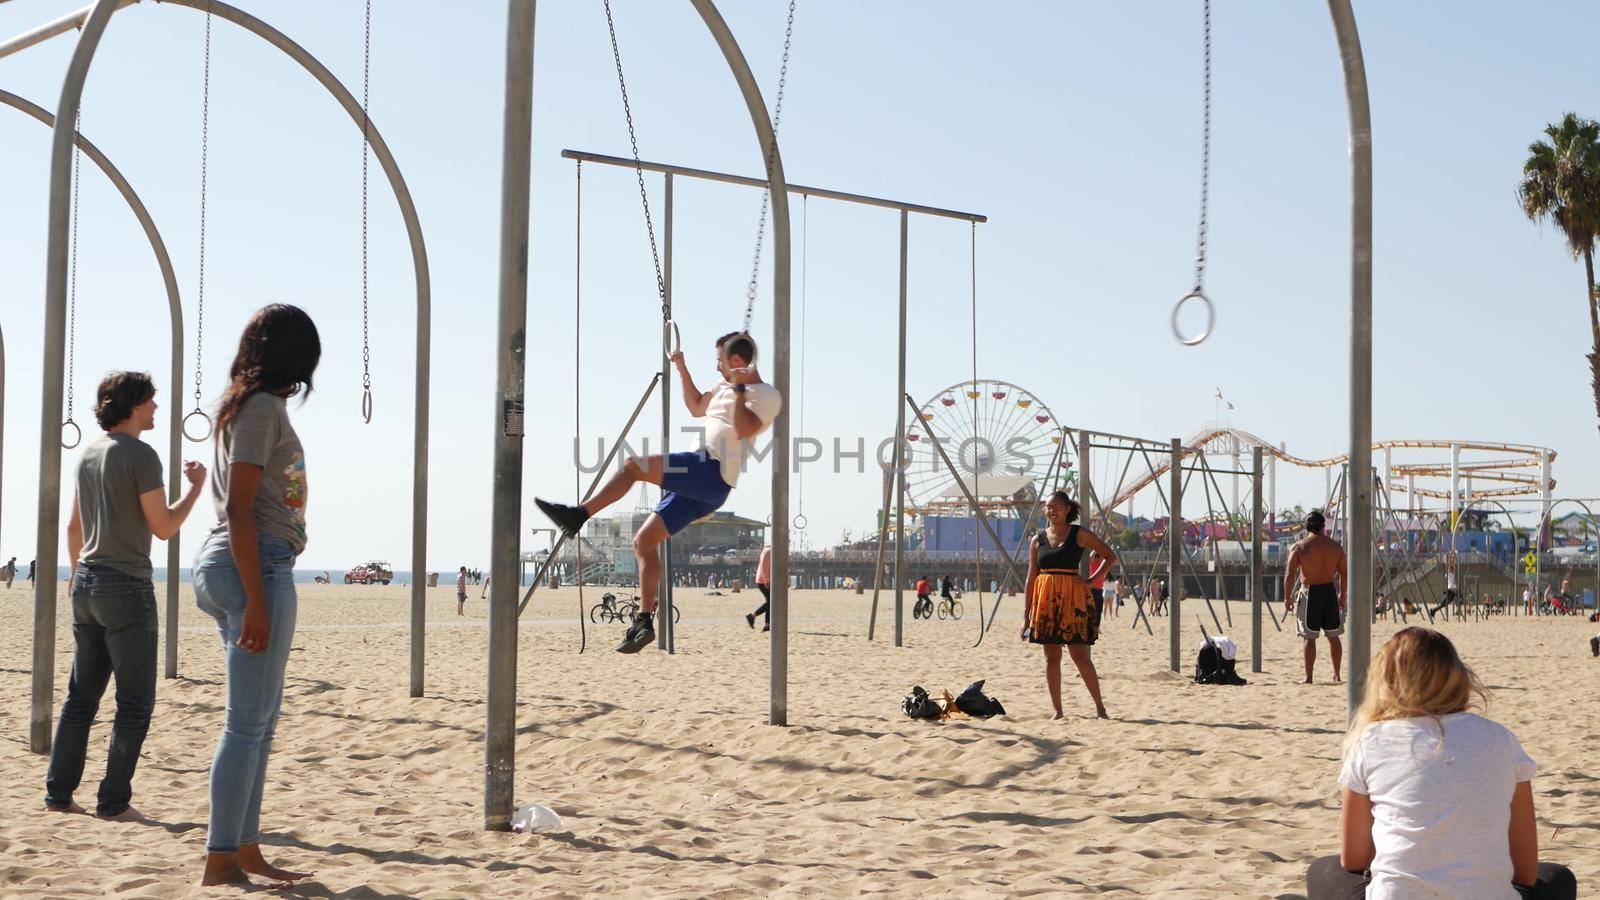 SANTA MONICA, LOS ANGELES CA USA - 28 OCT 2019: California summertime pacific ocean beach aesthetic, young people training and having fun on sports ground. Muscle beach and amusement park on pier.